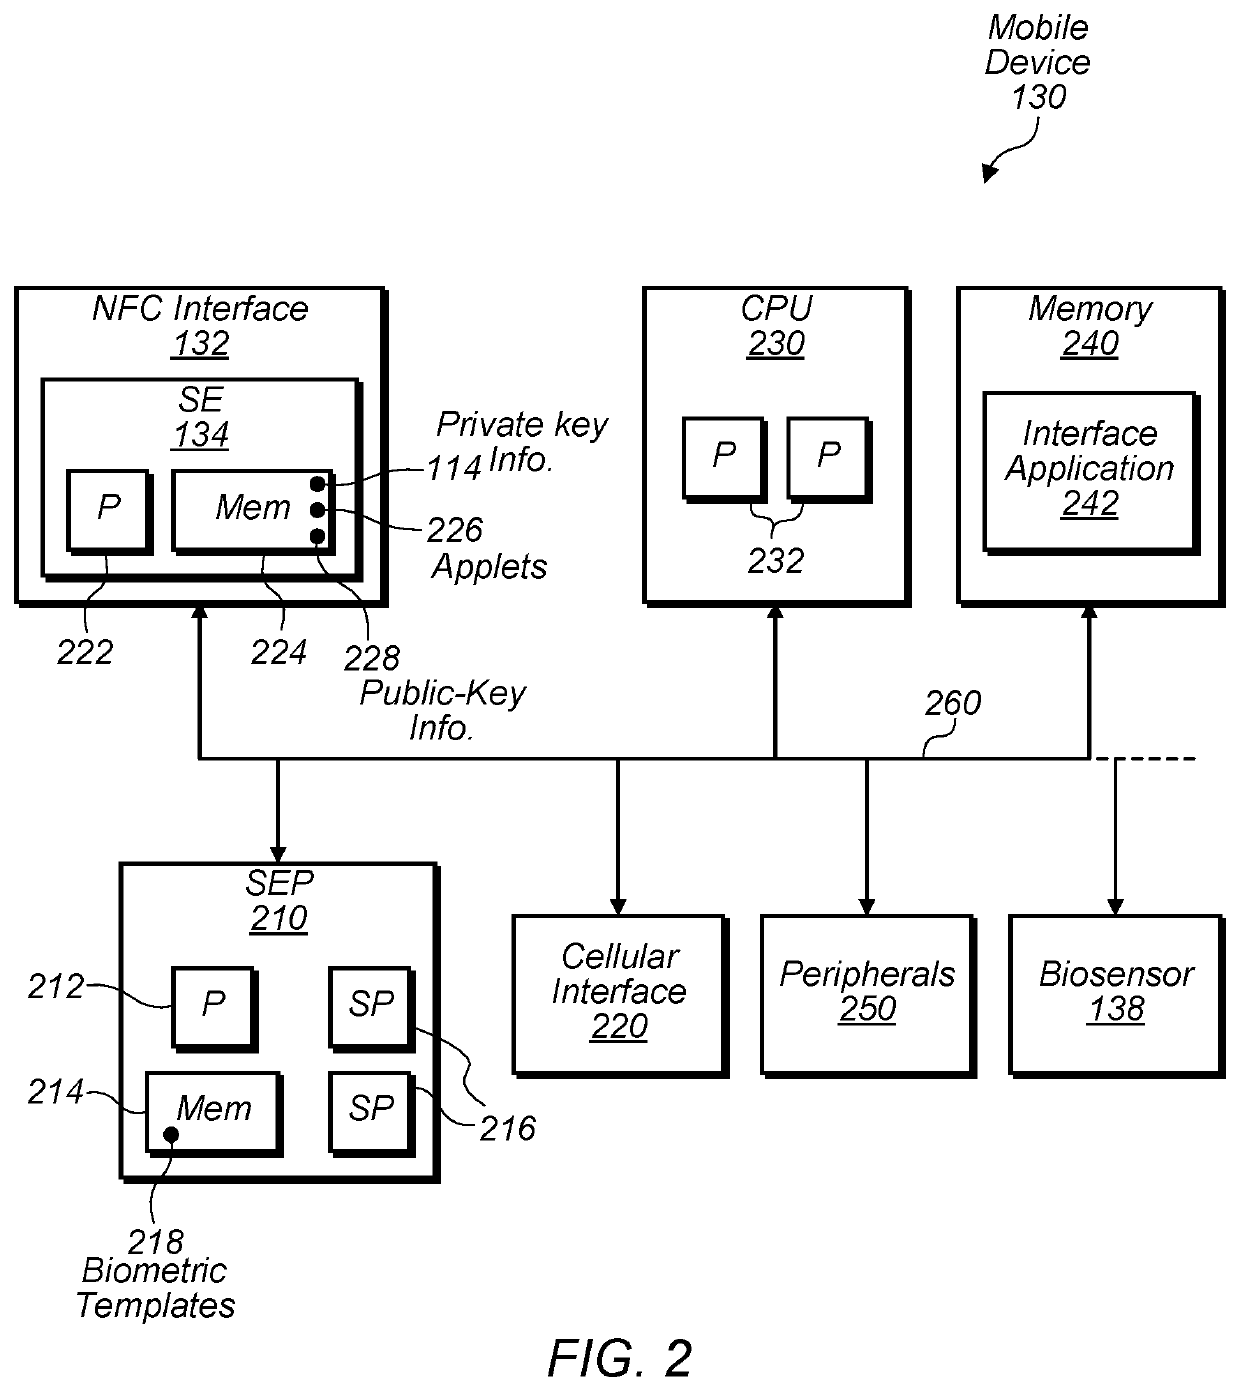 System access using a mobile device